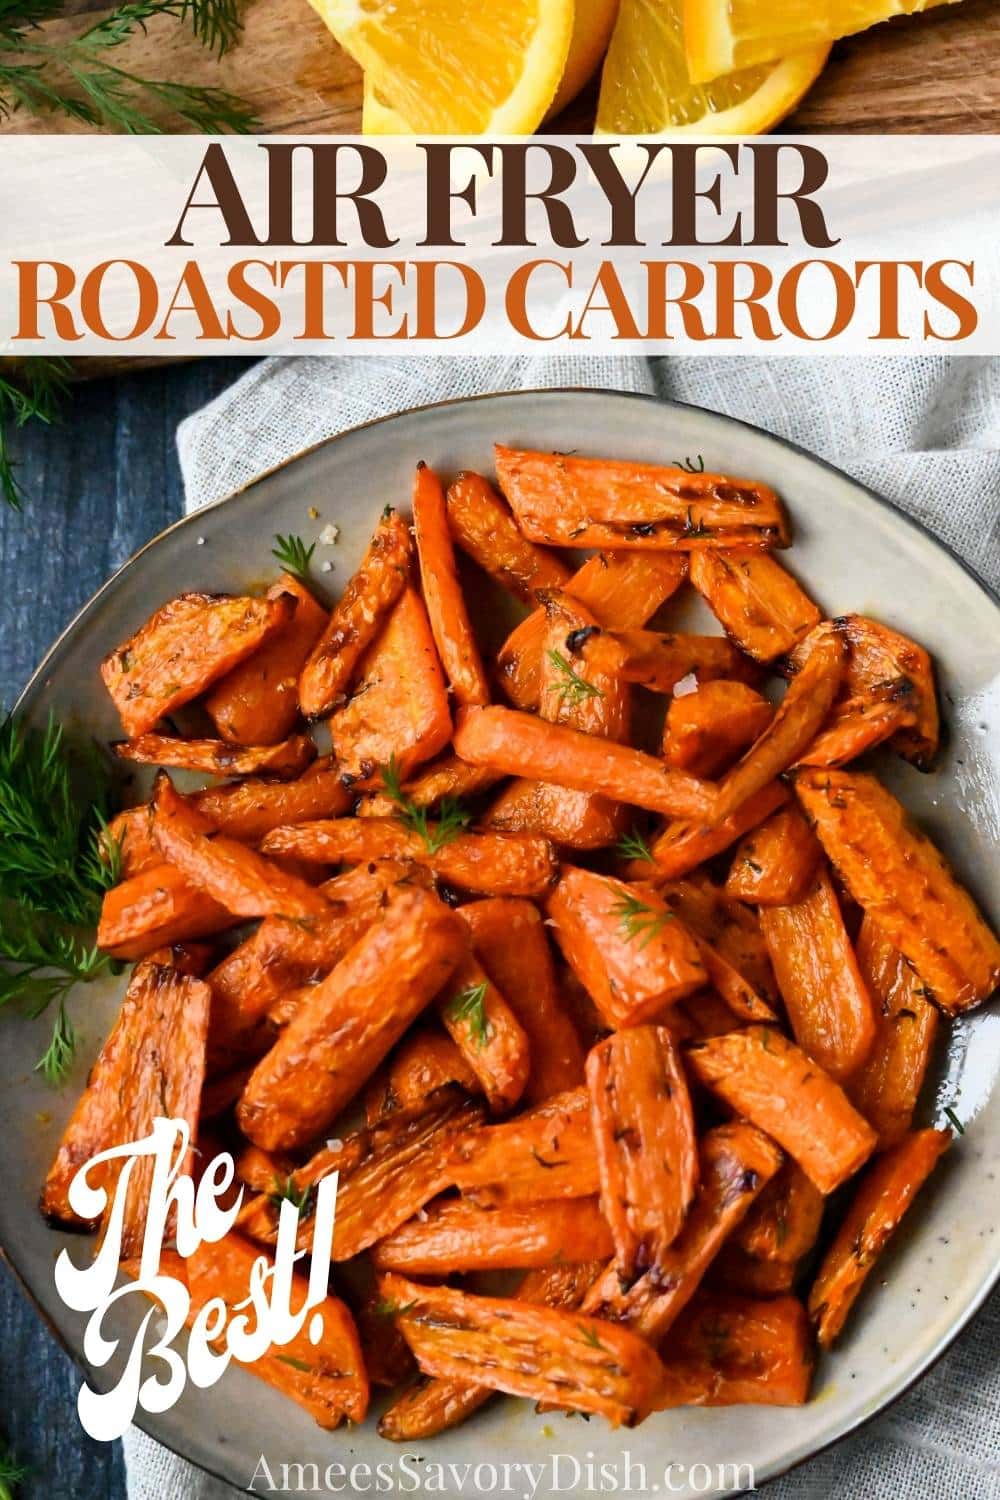 These air fryer roasted carrots are quick and delicious. In under 15 minutes, you’ll have a batch of perfectly caramelized carrots! via @Ameessavorydish